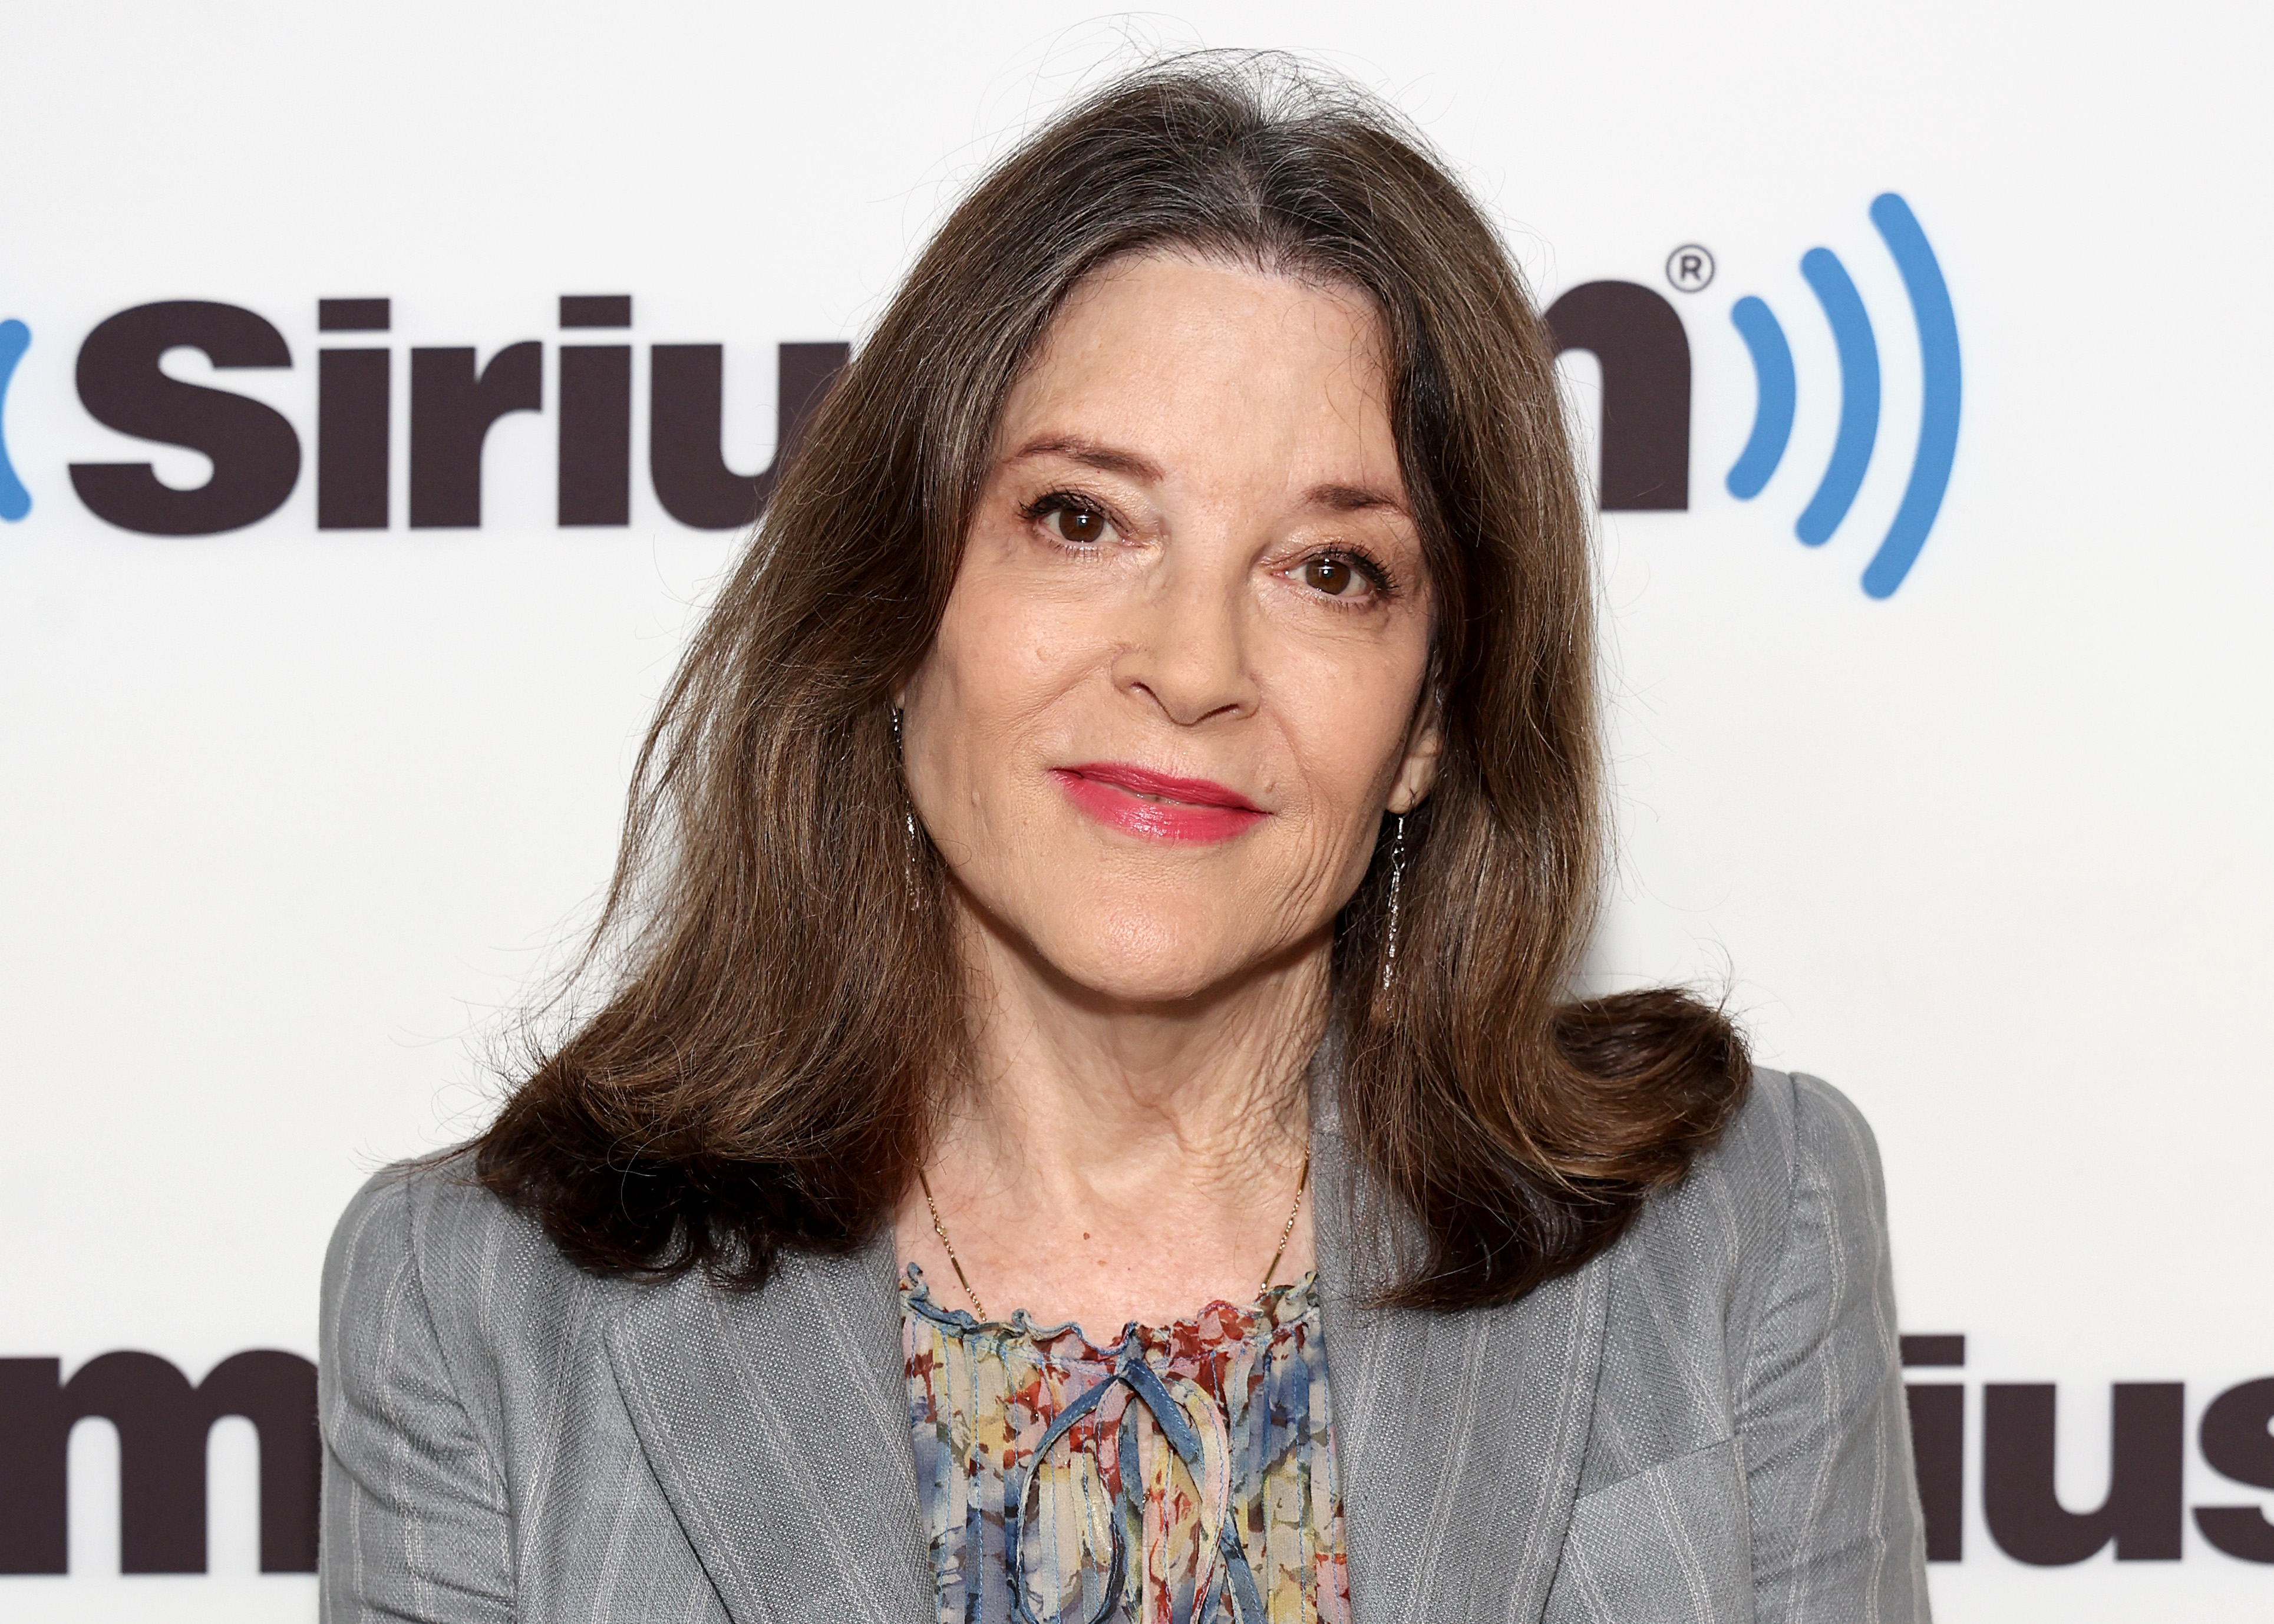 Marianne Williamson  at a SiriusXM event wearing a floral blouse and blazer